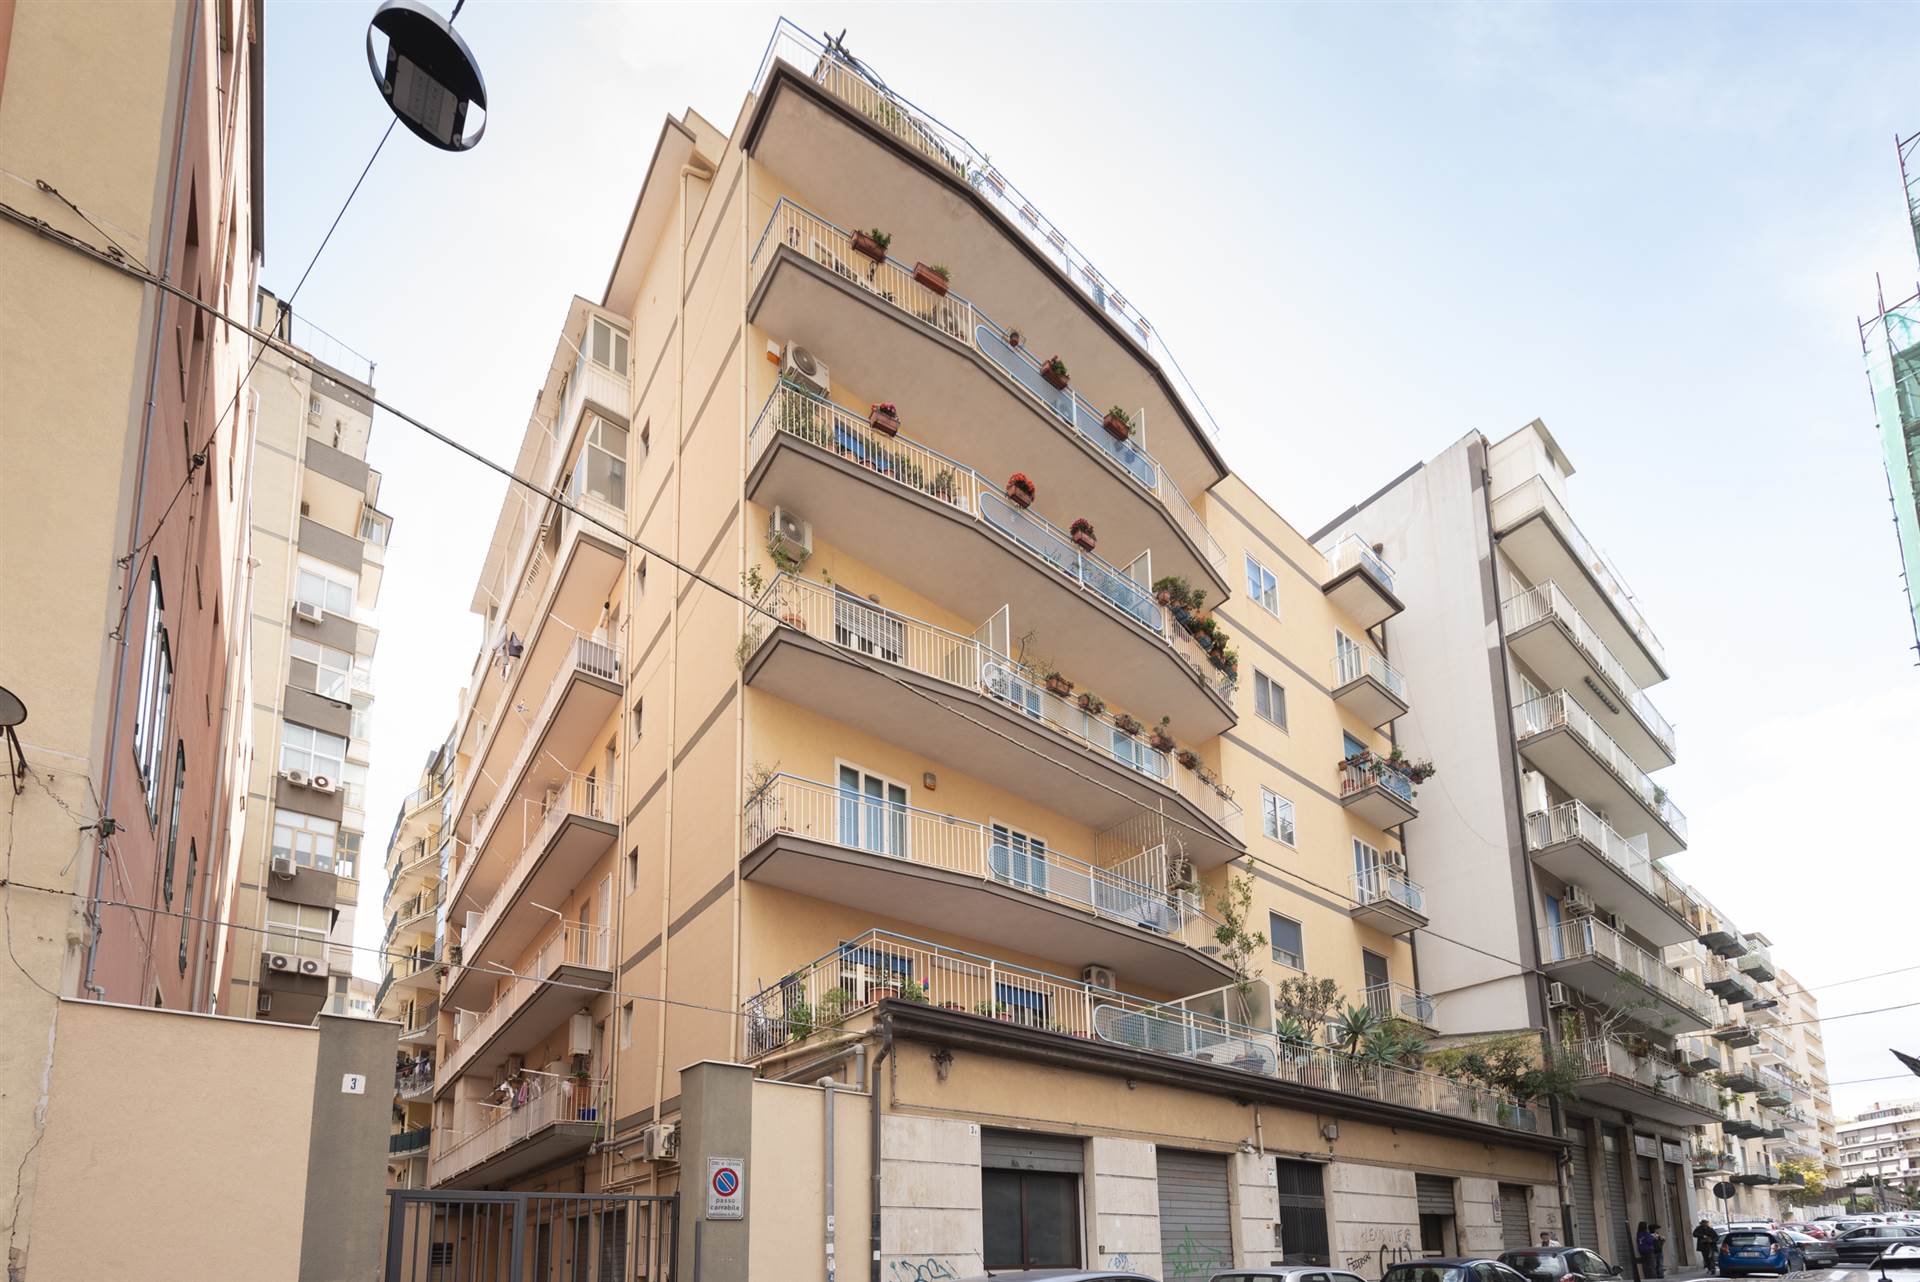 PIAZZA LANZA, CATANIA, Apartment for sale of 142 Sq. mt., Be restored, Heating Individual heating system, Energetic class: F, Epi: 207,2 kwh/m2 year, 